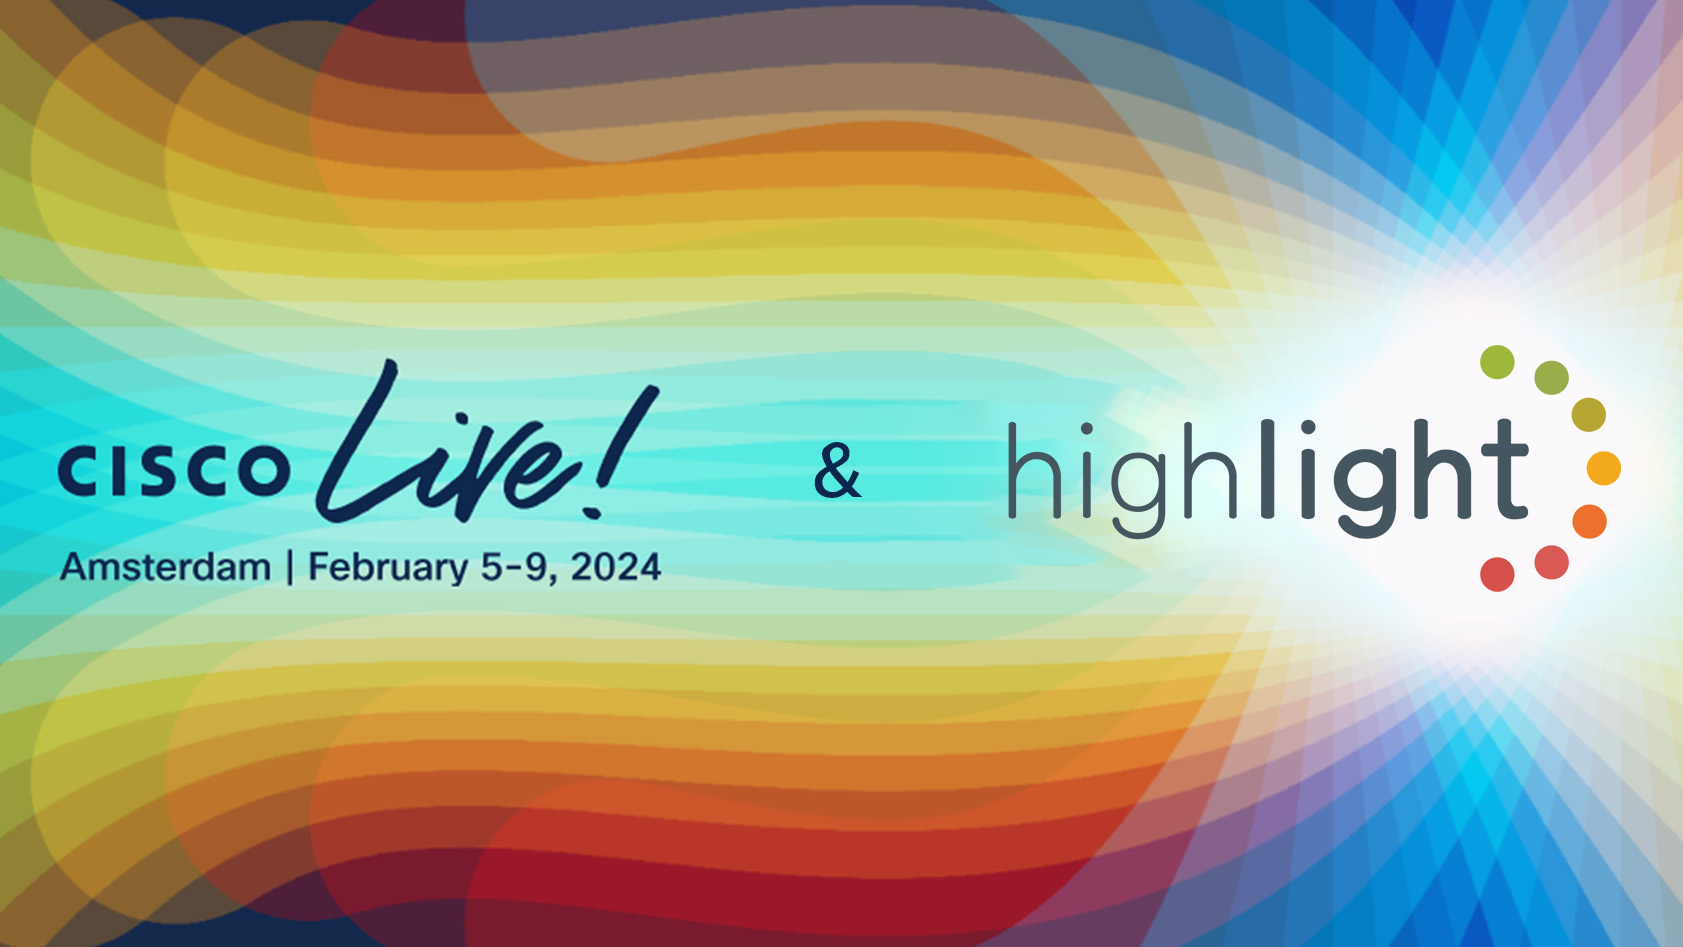 Highlight Supports Cisco Managed Services Focus at Cisco Live EMEA 2024